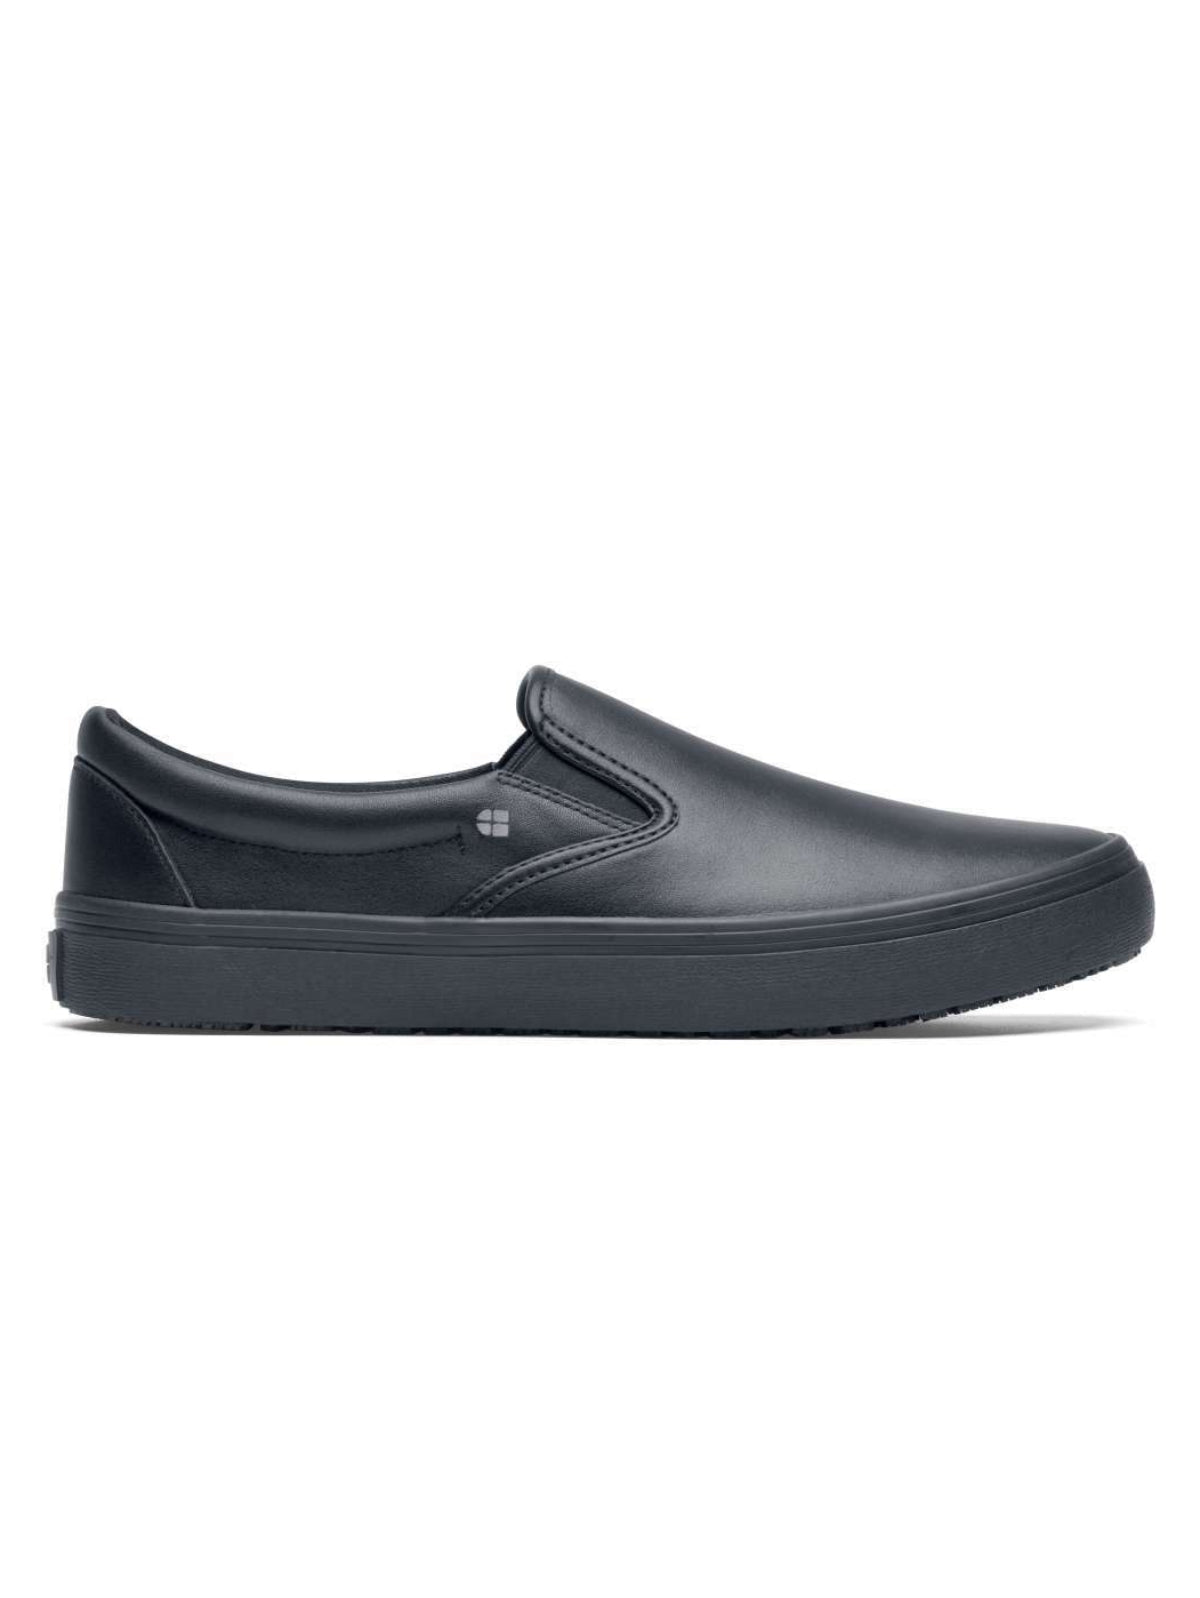 Unisex Work Shoe Merlin Black by Shoes For Crews -  ChefsCotton